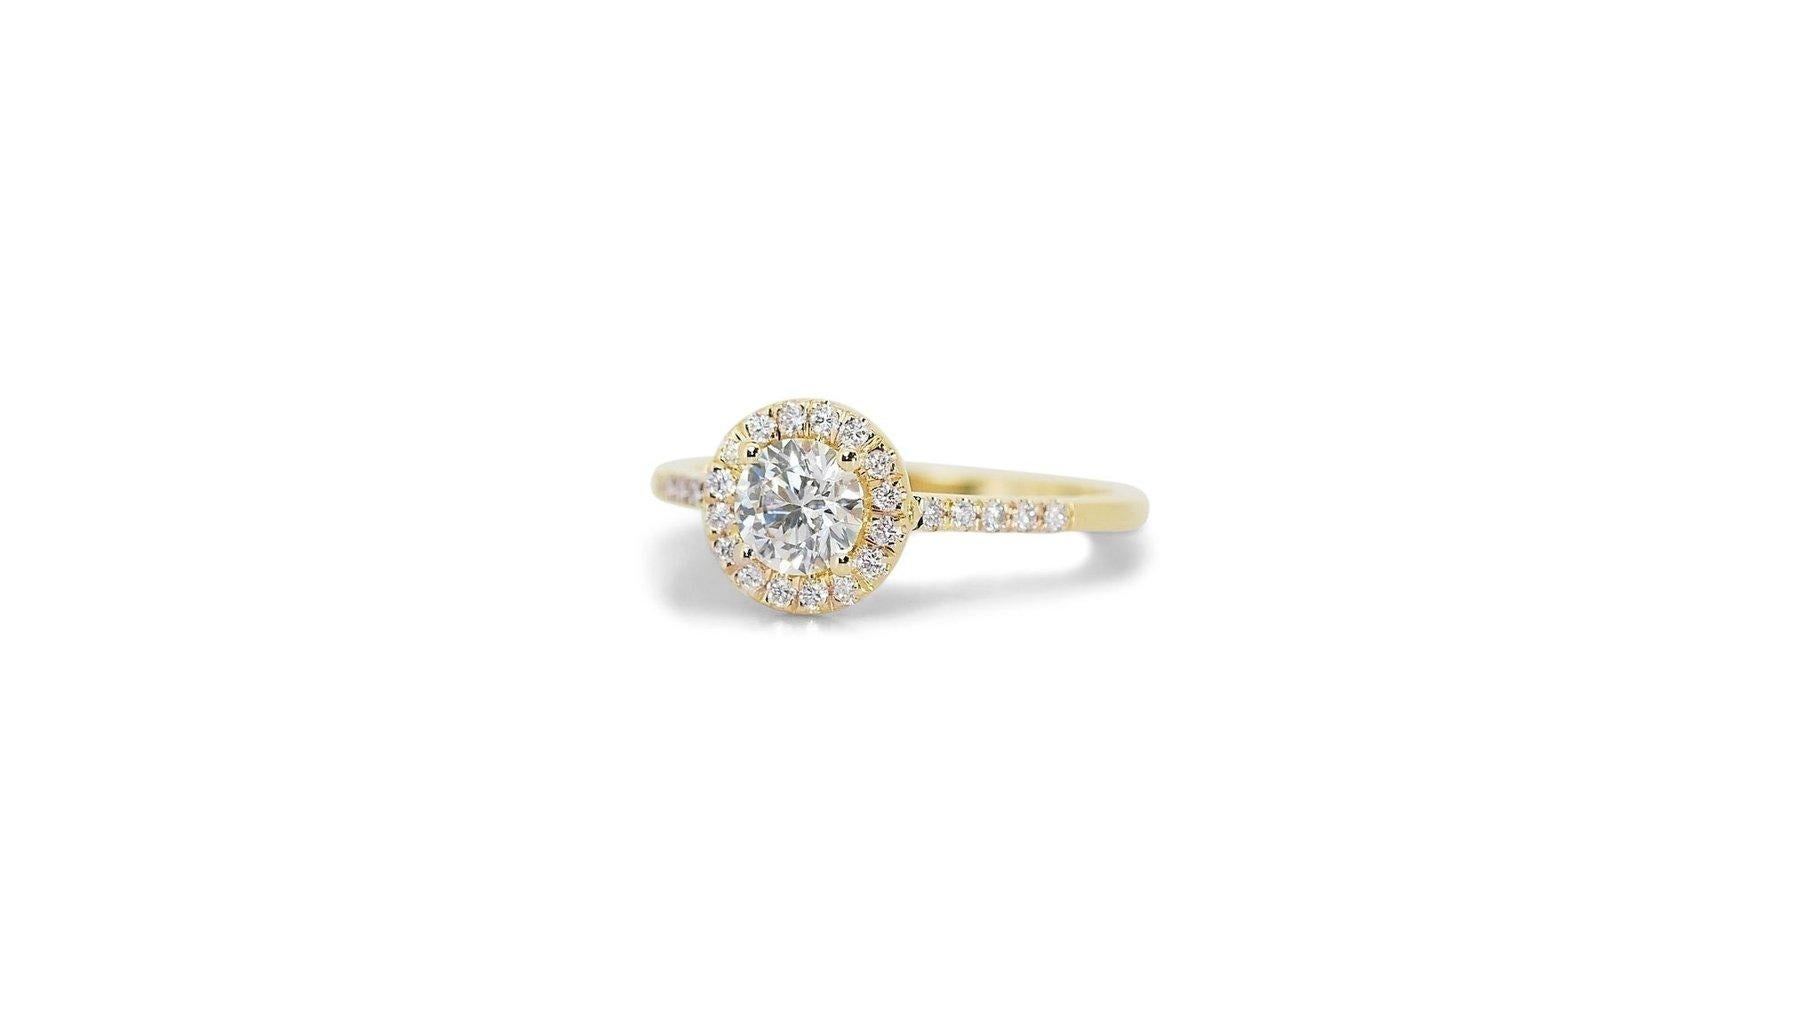 Round Cut Captivating 18k Yellow Gold Natural Diamond Halo Ring w/1.21 ct- GIA Certified For Sale